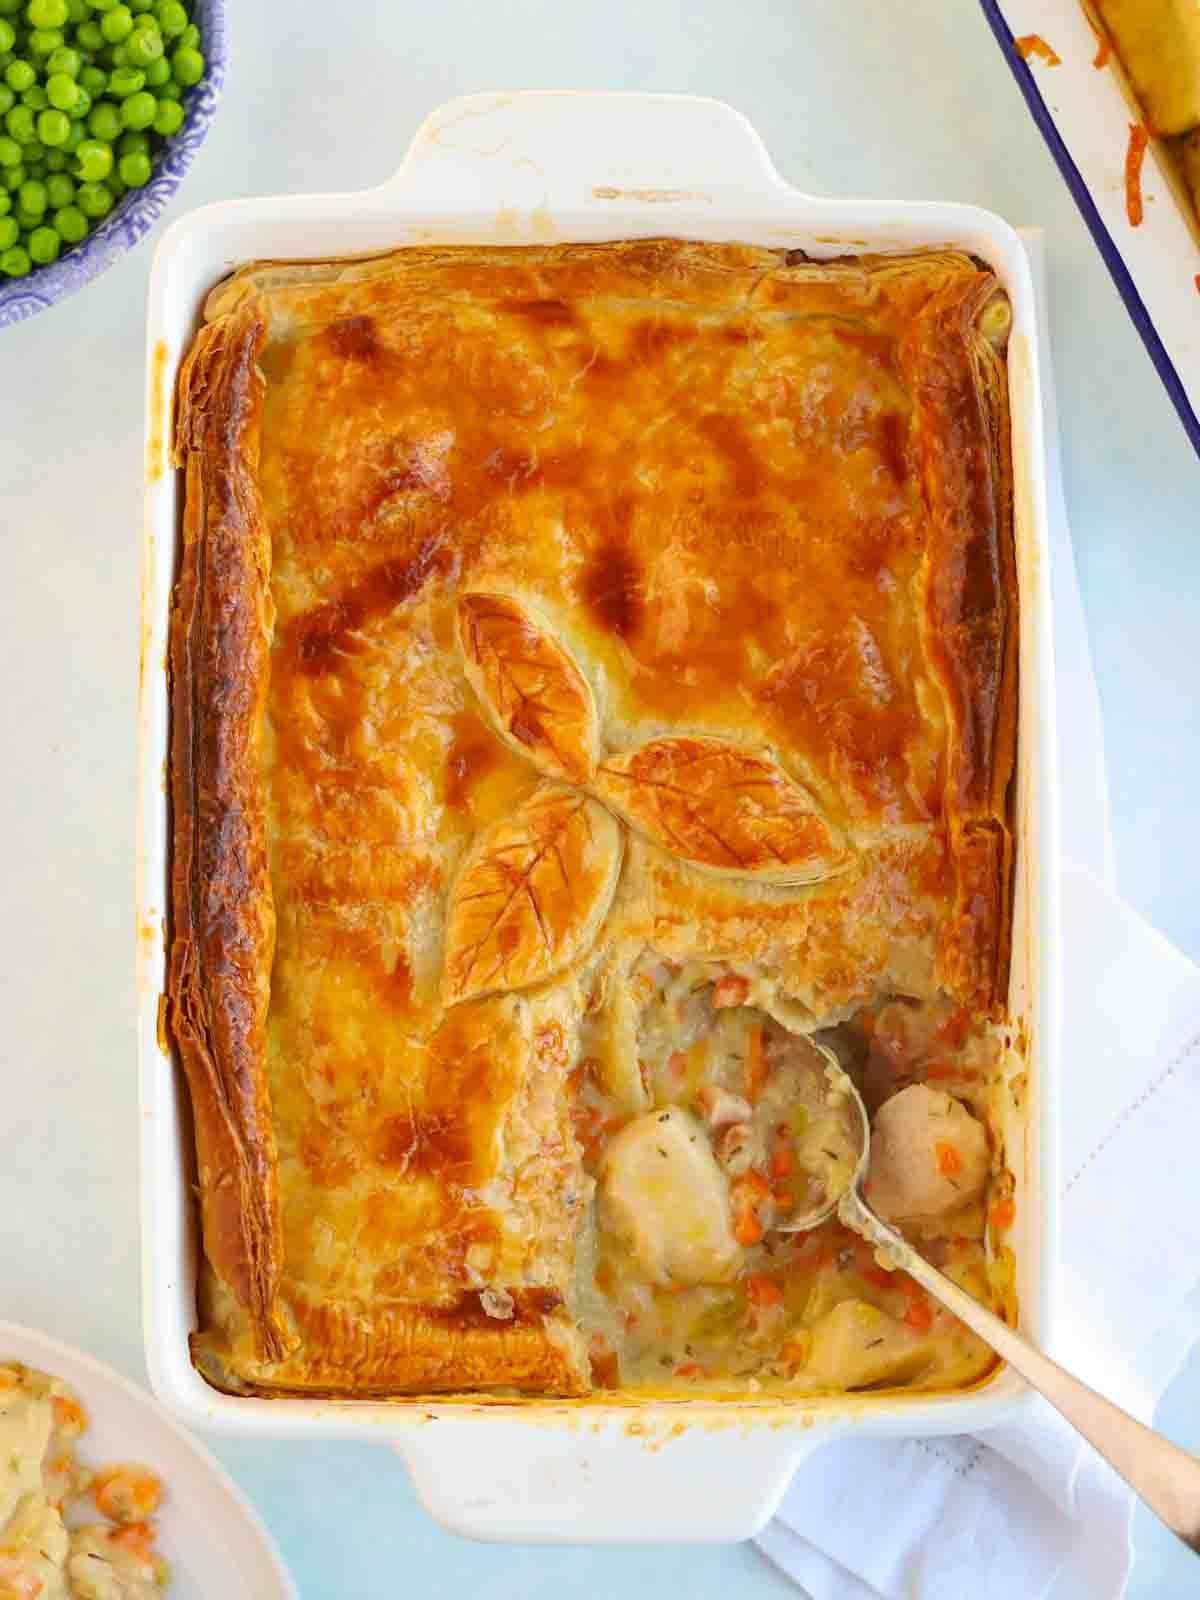 A cooked chicken pie with a corner portion missing, with a spoon ready to serve more. Laid on a white table cloth with a side of peas in a bowl.